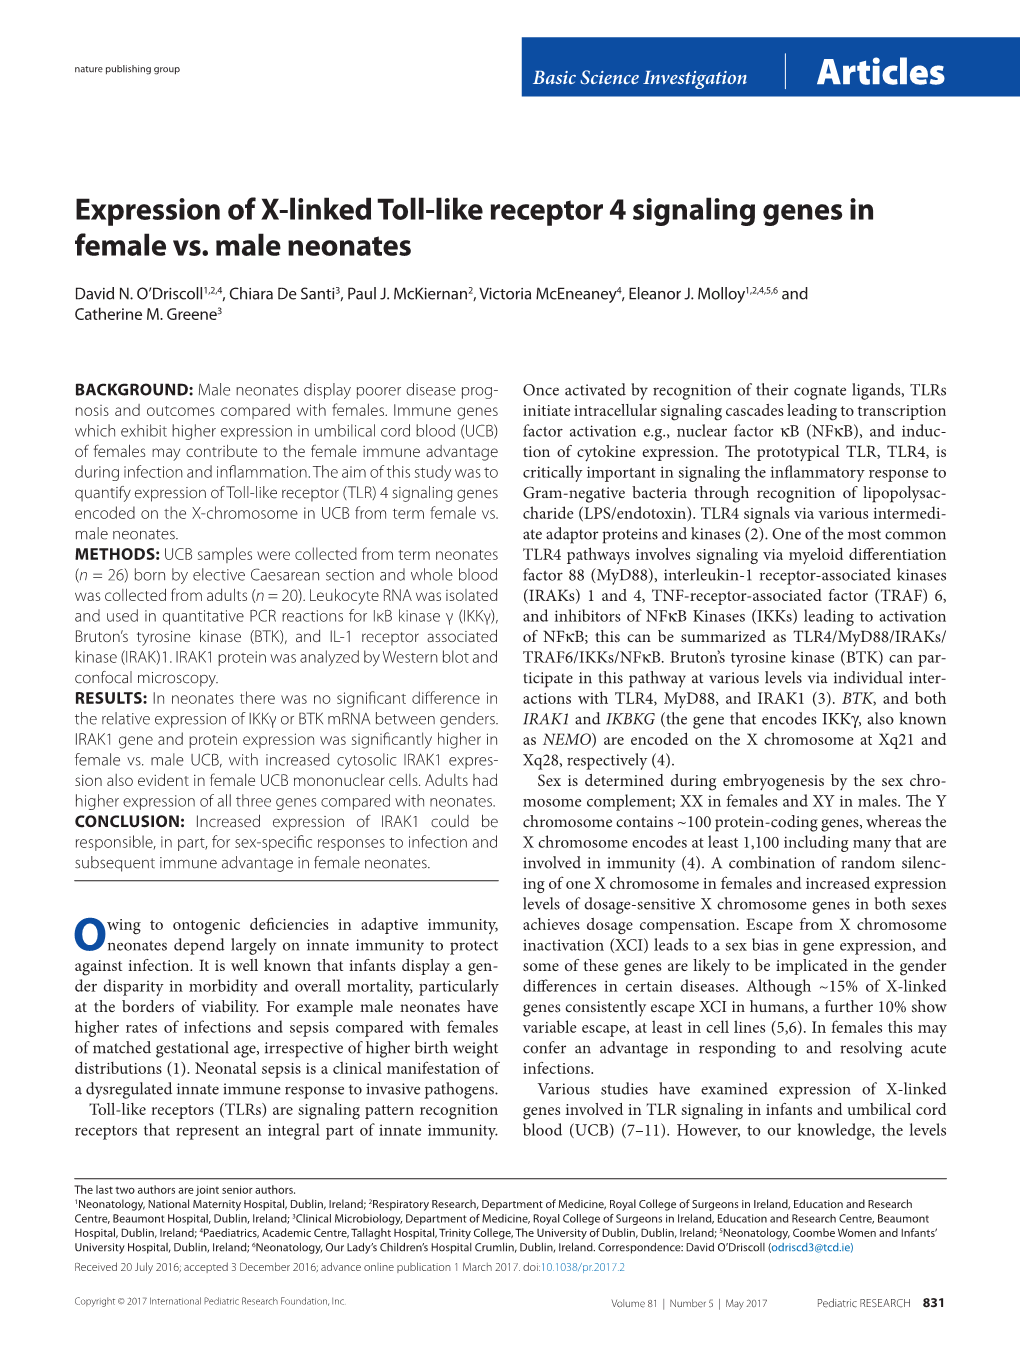 Expression of X-Linked Toll-Like Receptor 4 Signaling Genes in Female Vs